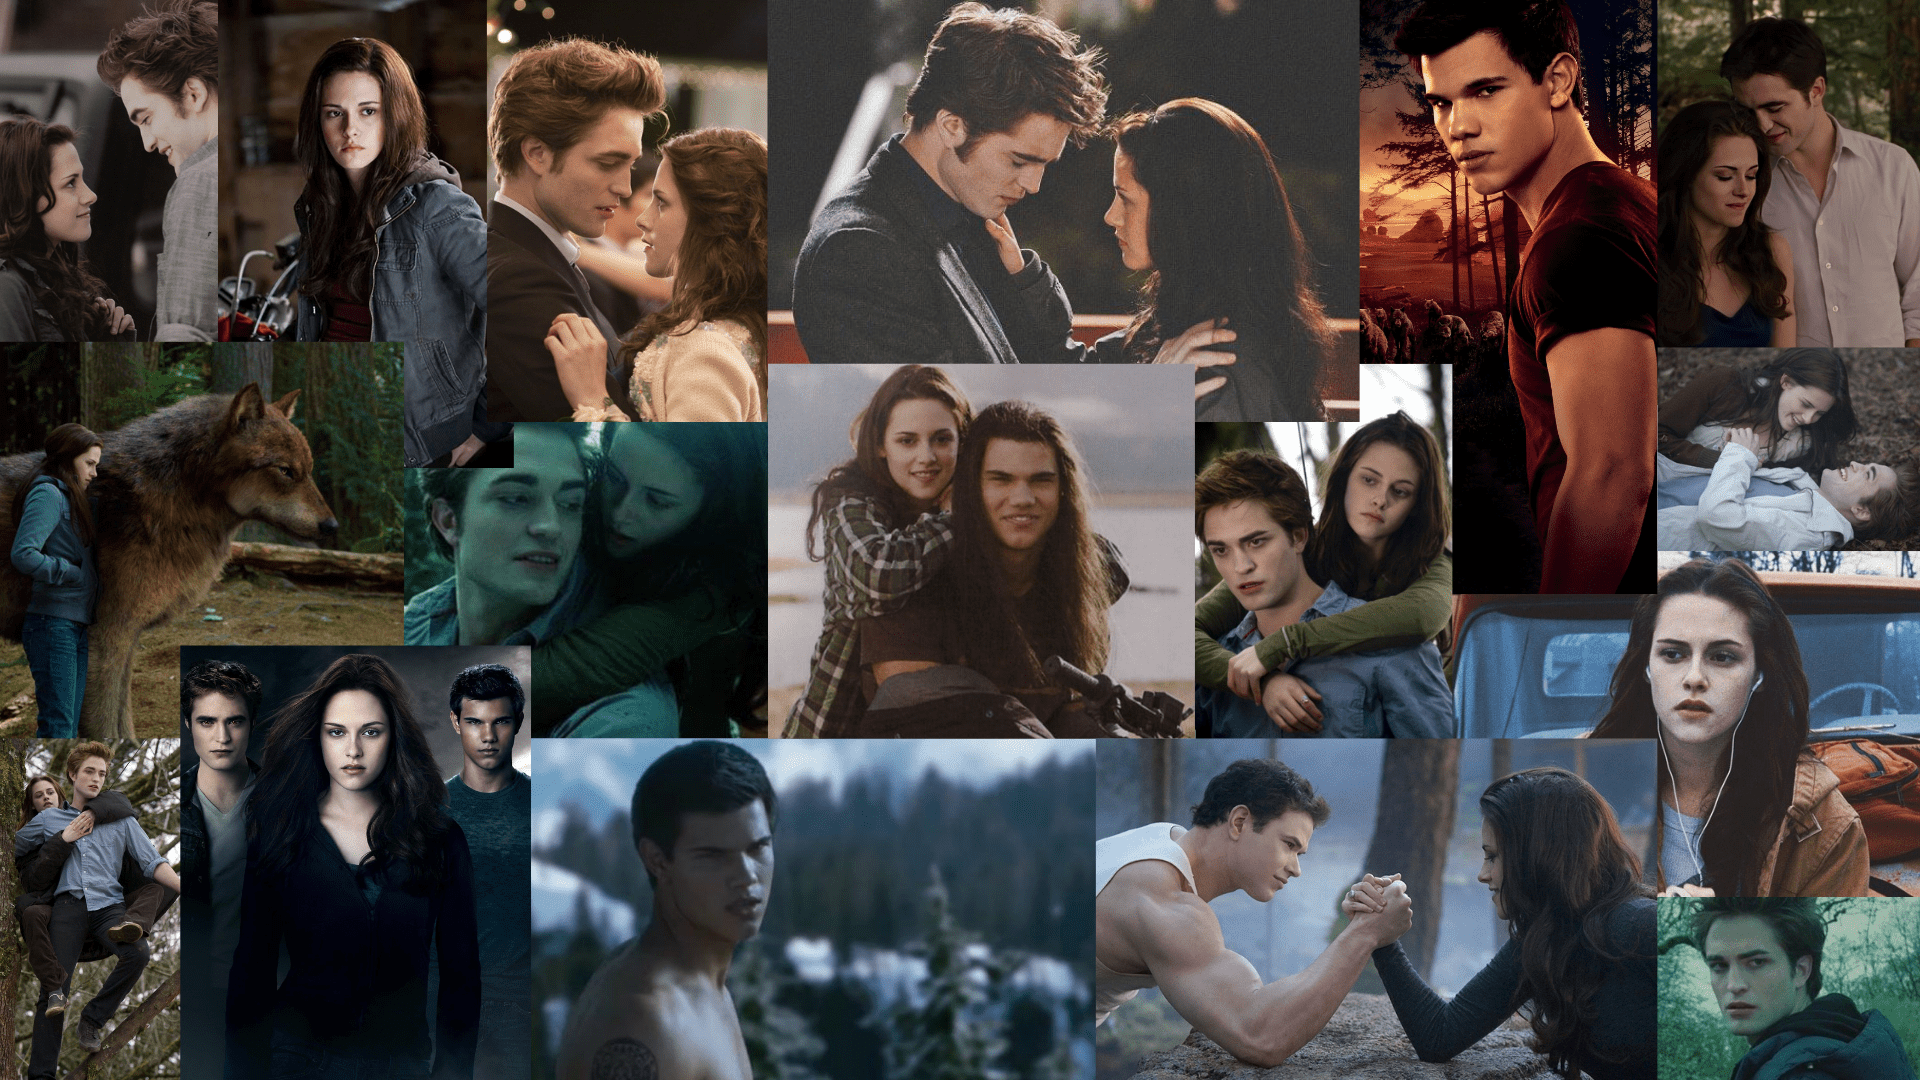 A collage of scenes from the Twilight series. - Twilight